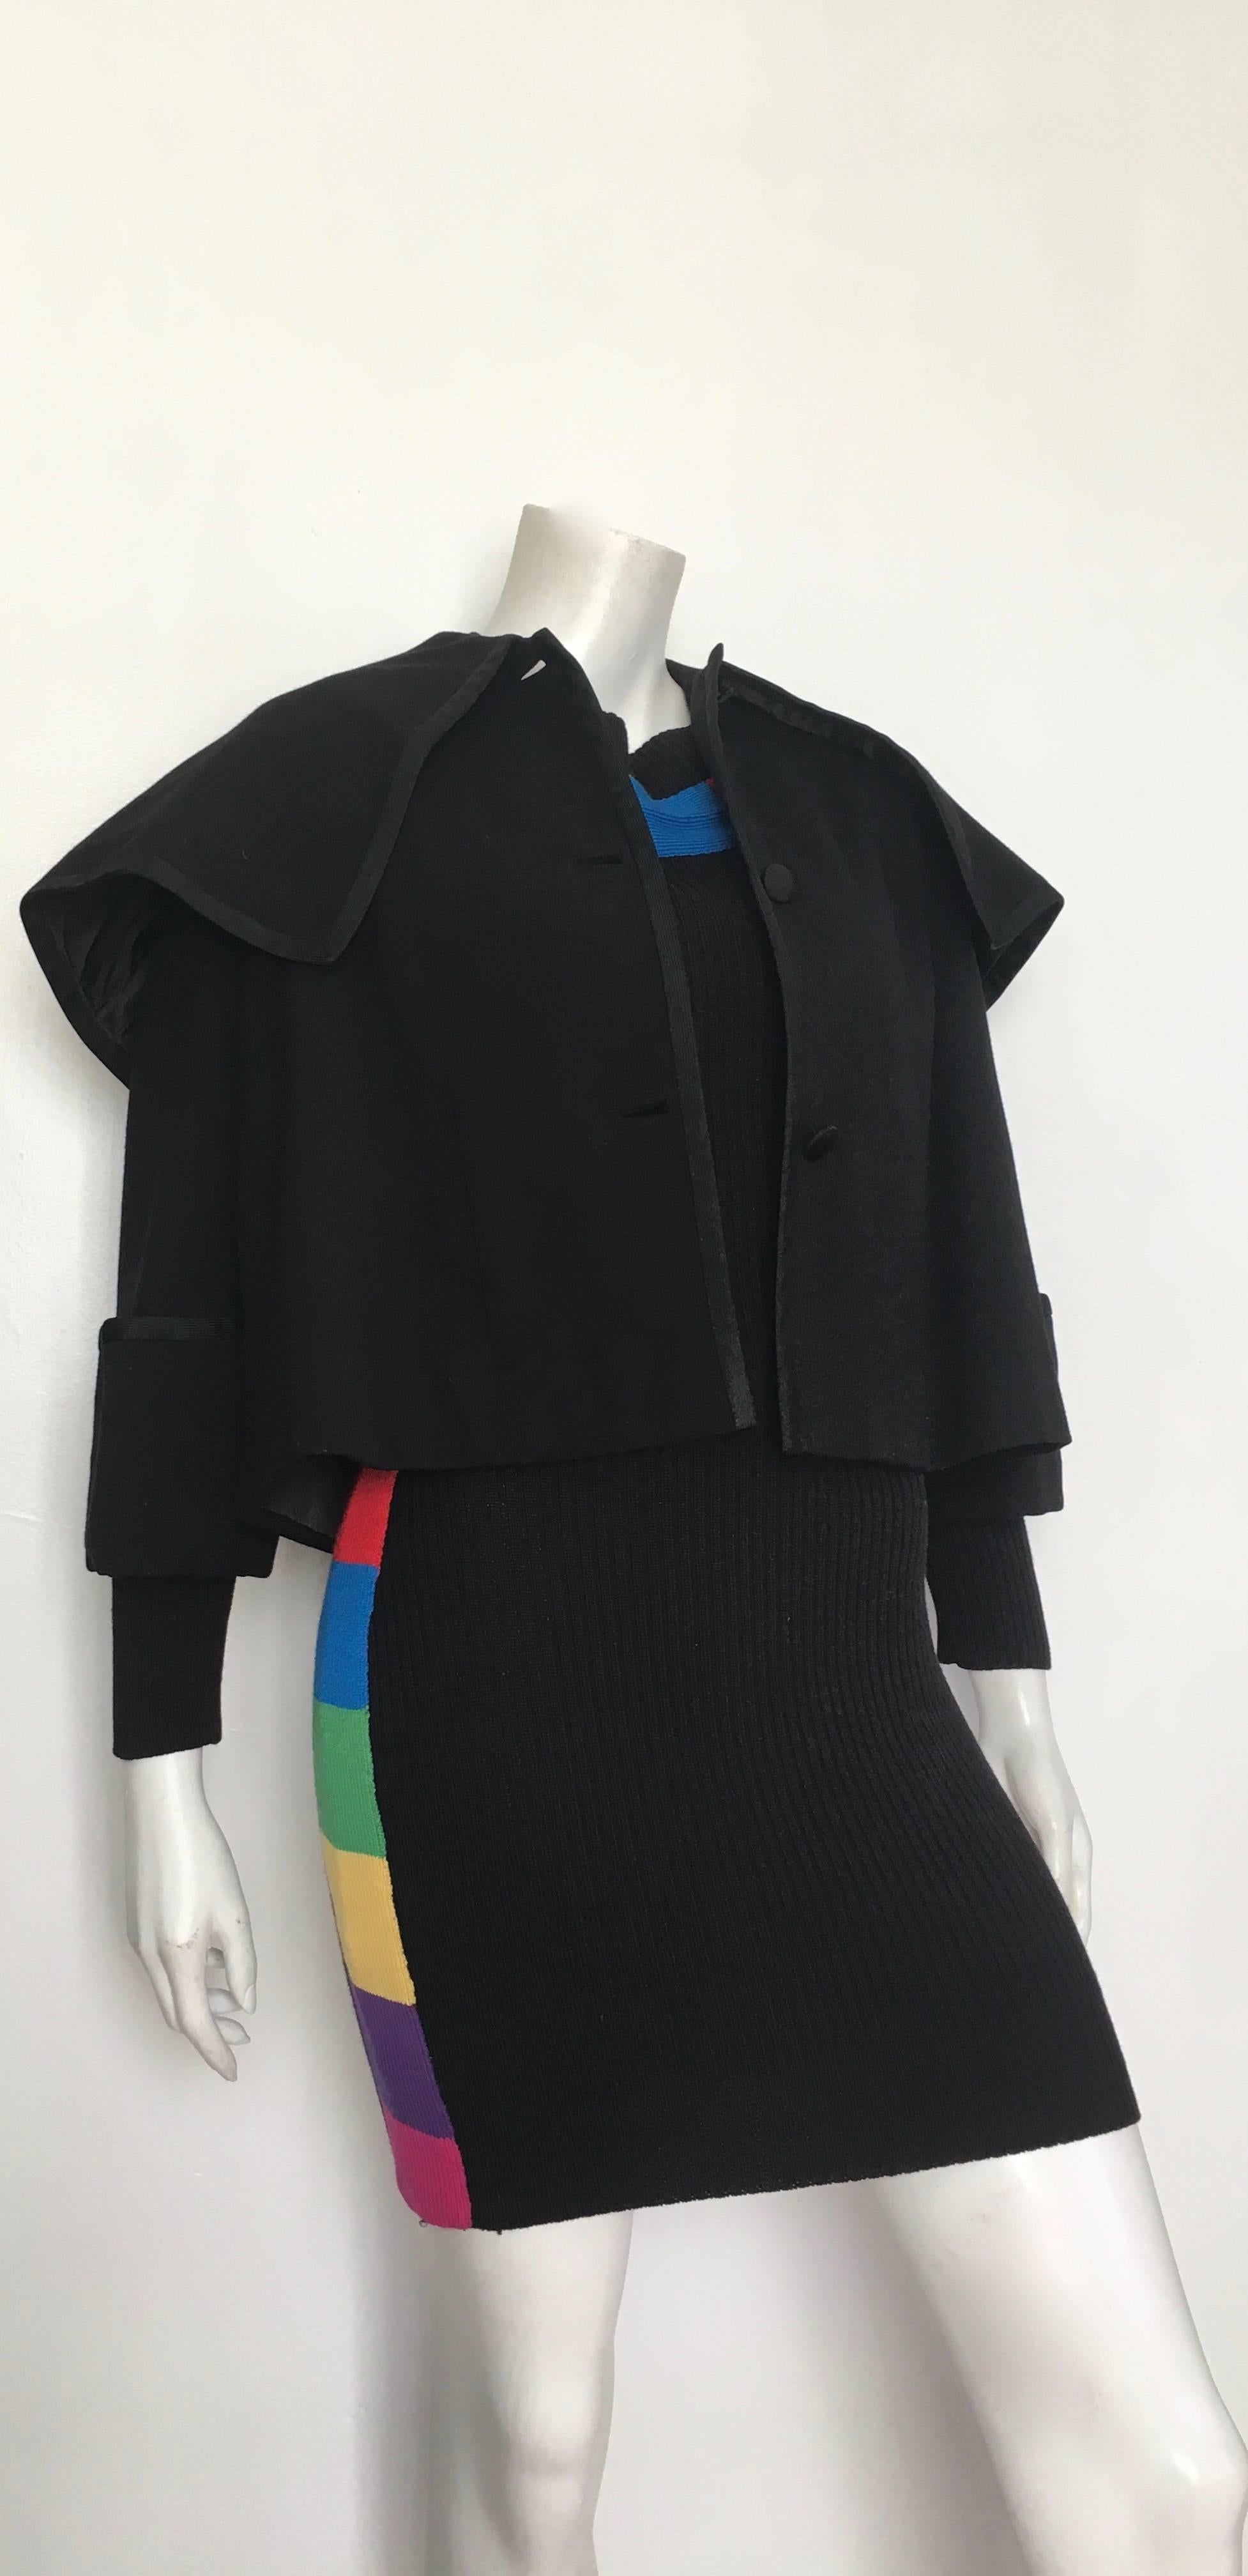 Patrick Kelly 1980s Black Wool Knit 'Rainbow' Mini Dress Size 4. In Excellent Condition For Sale In Atlanta, GA